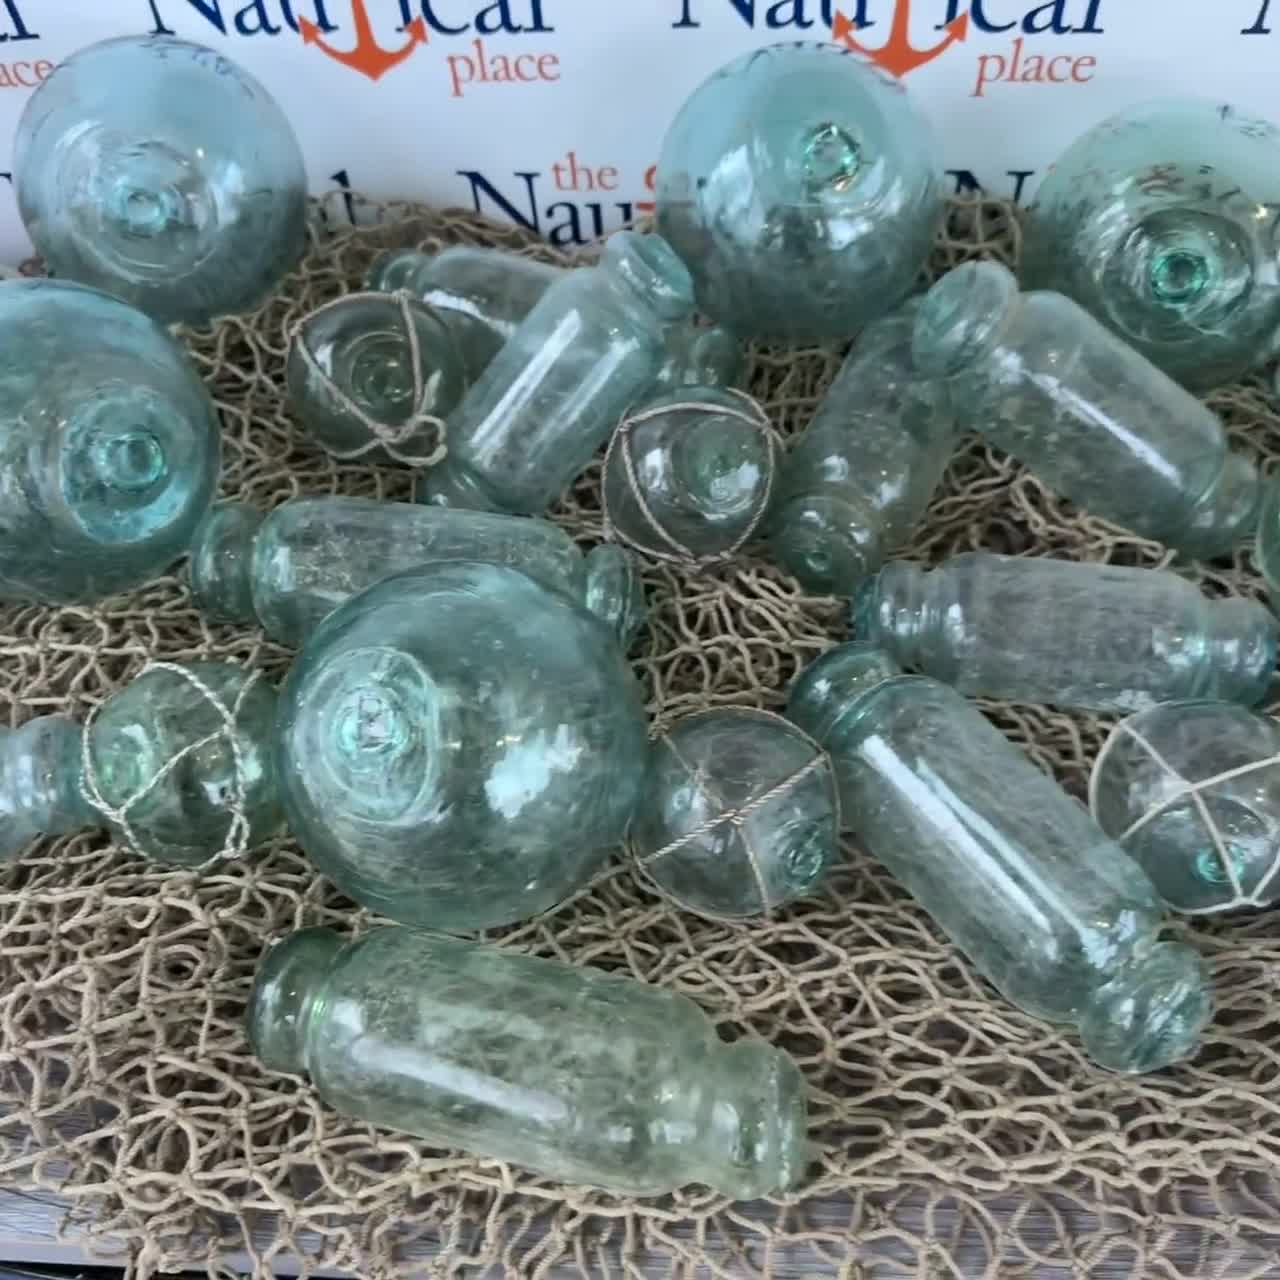 Japanese Glass Rolling Pin Floats, Authentic Japan Buoys Once